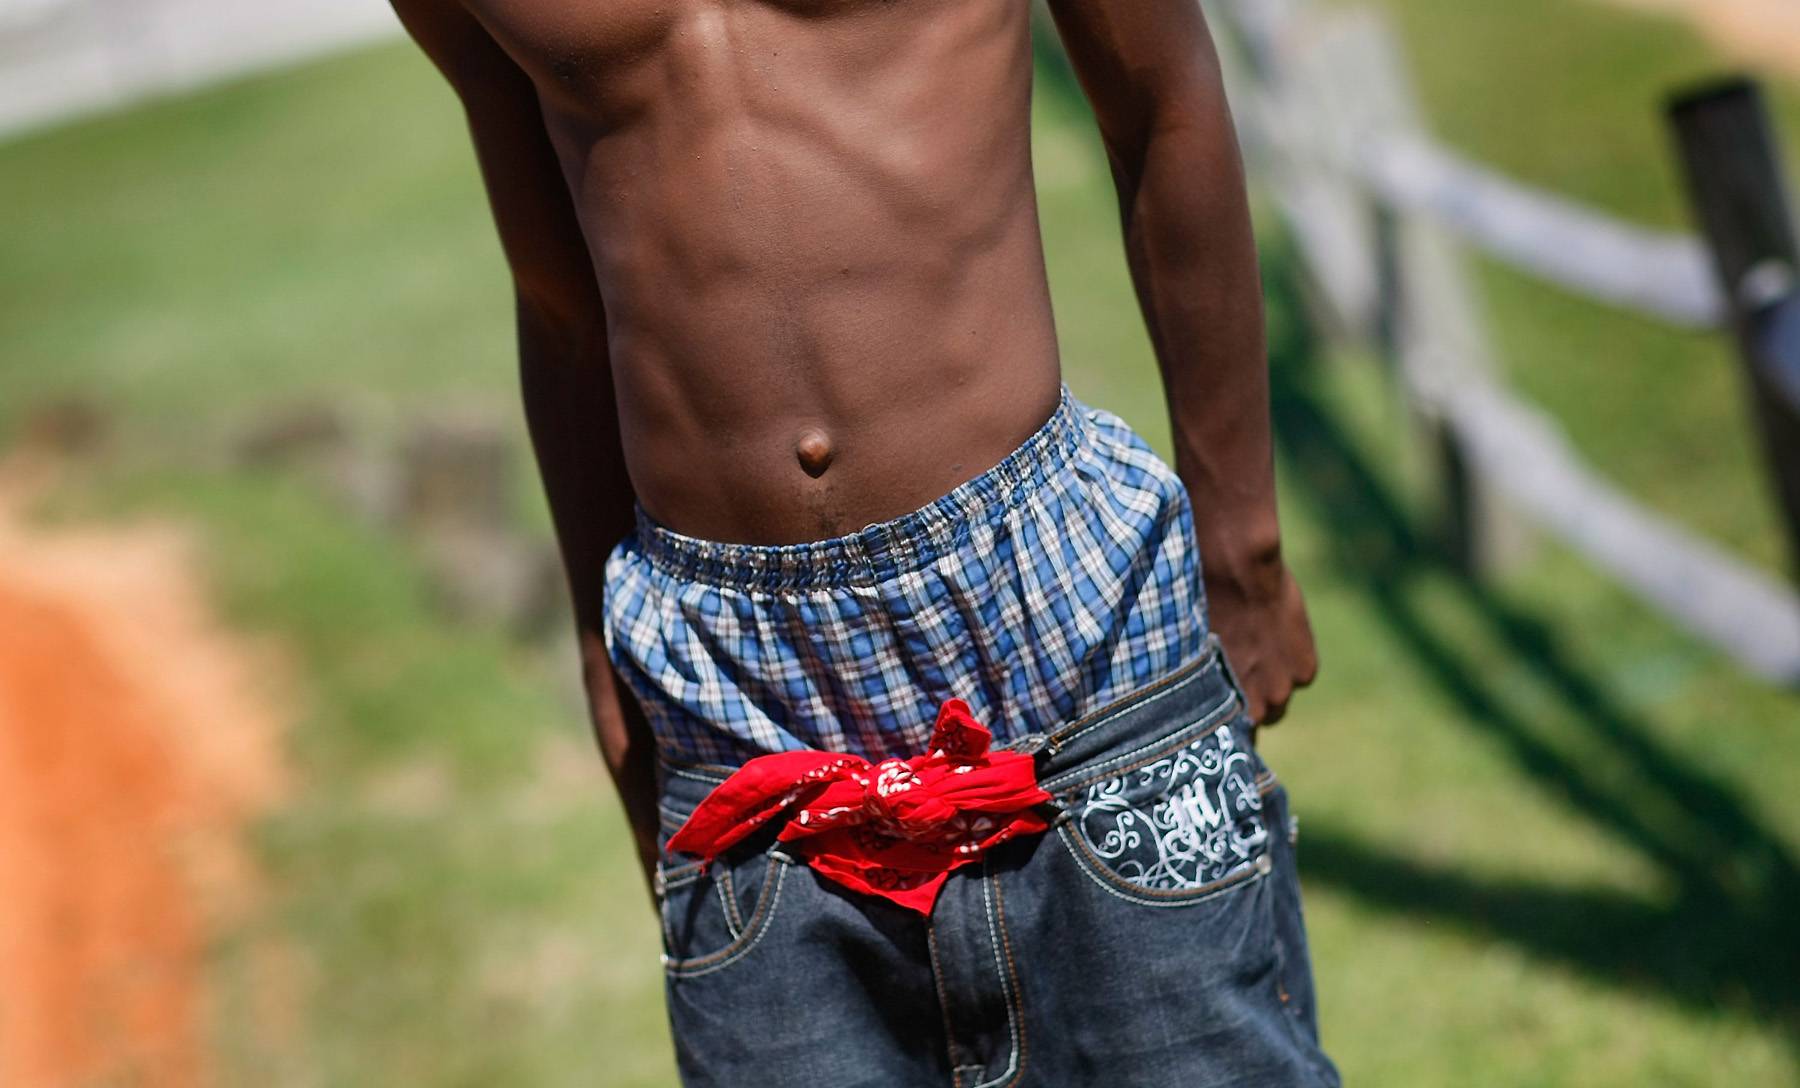 Saggy pants banned on Fort Worth buses - how low is too low? - CBS News